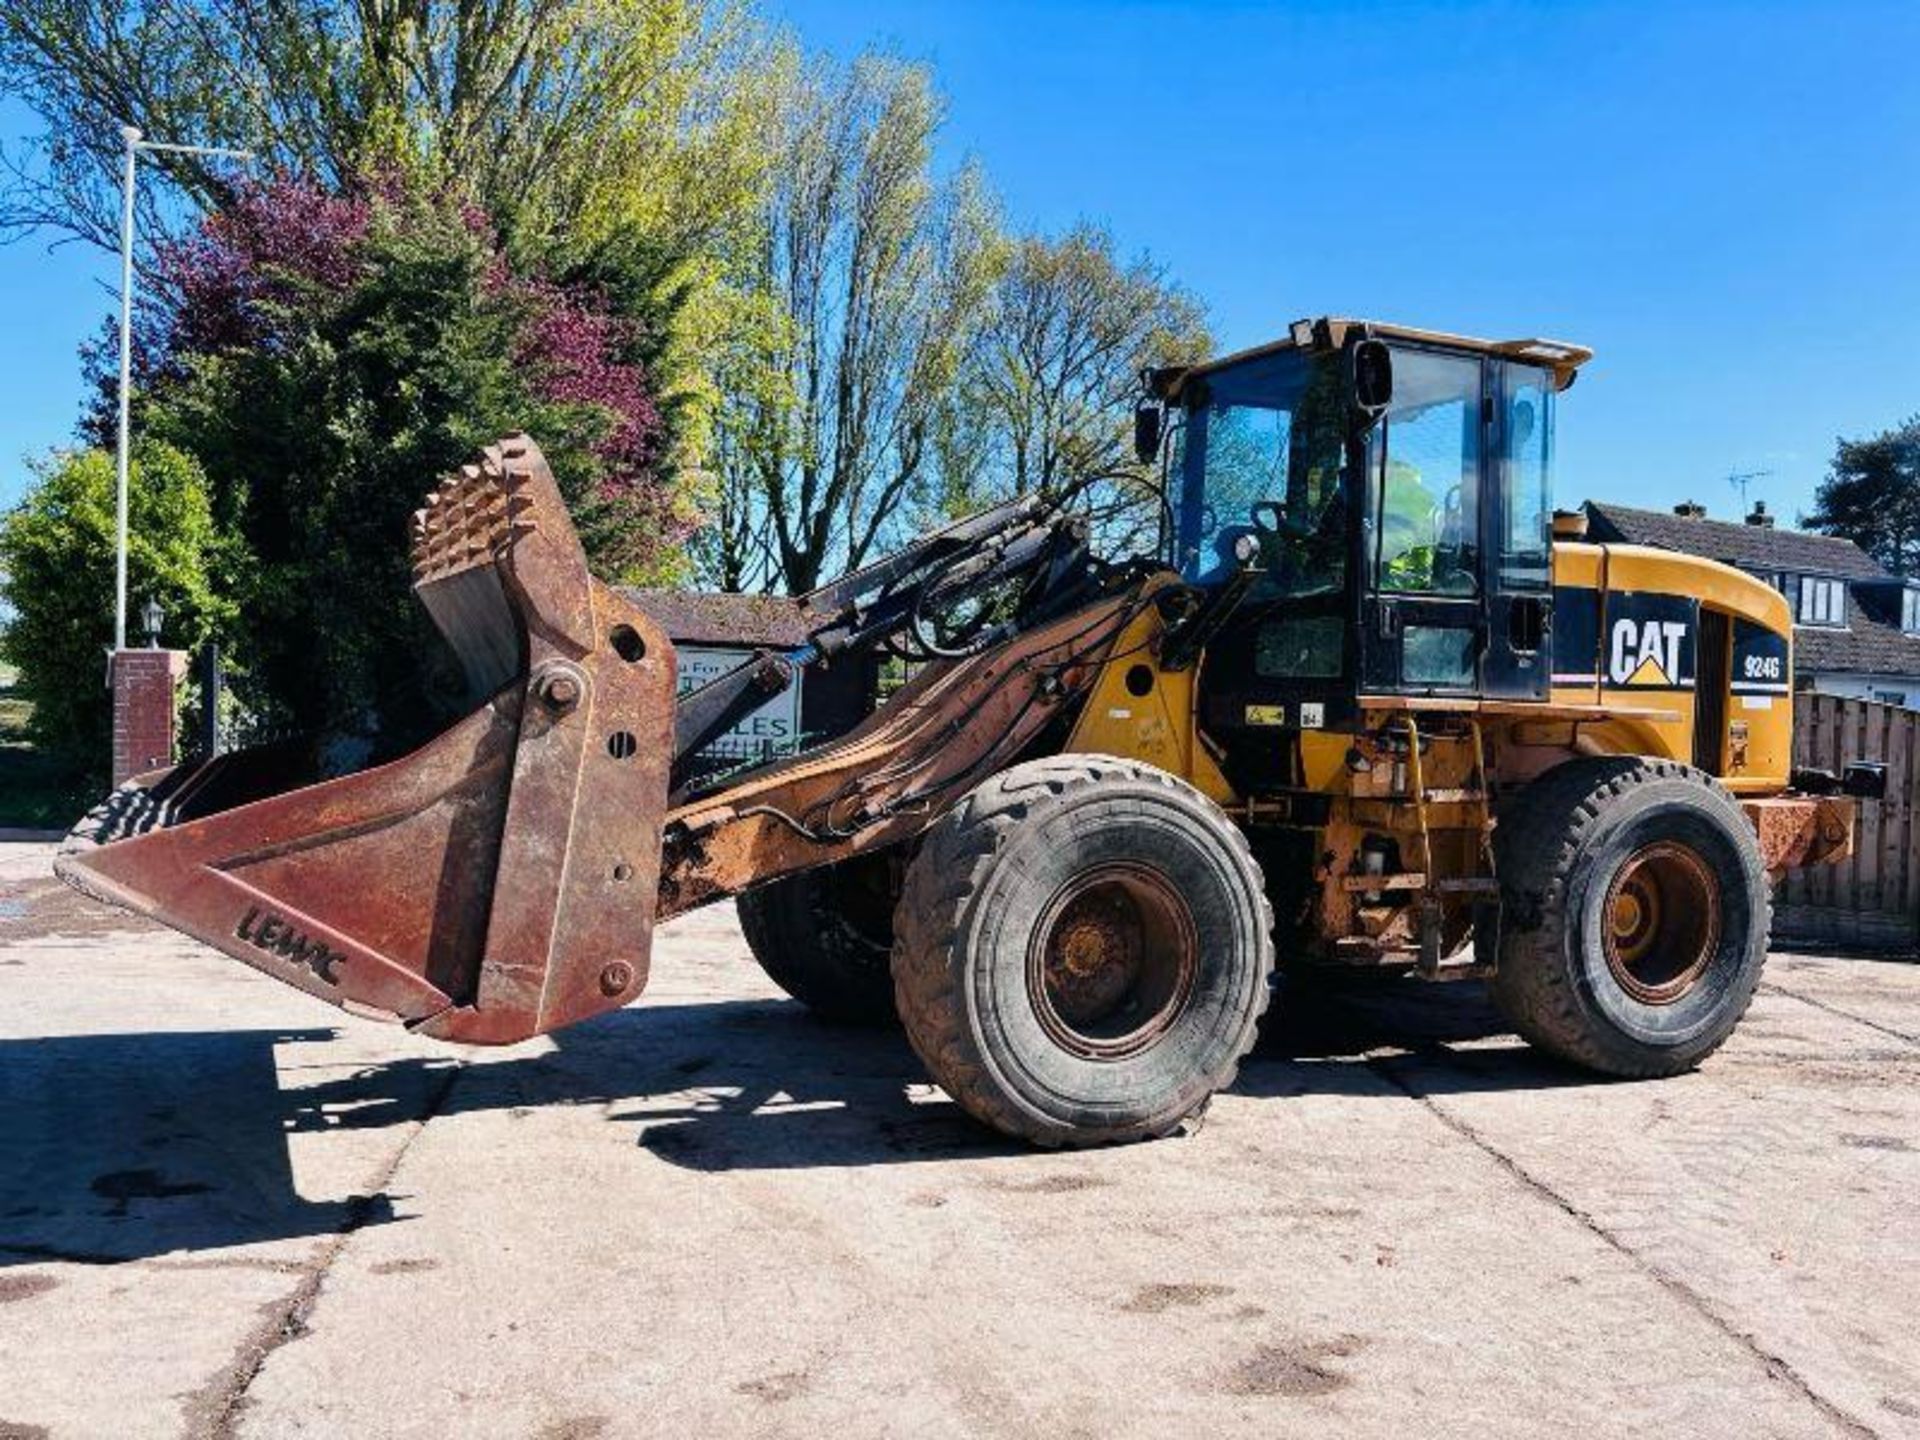 CATERPILLAR 924G 4WD LOADING SHOVEL C/W FOUR IN ONE BUCKET  - Image 10 of 18